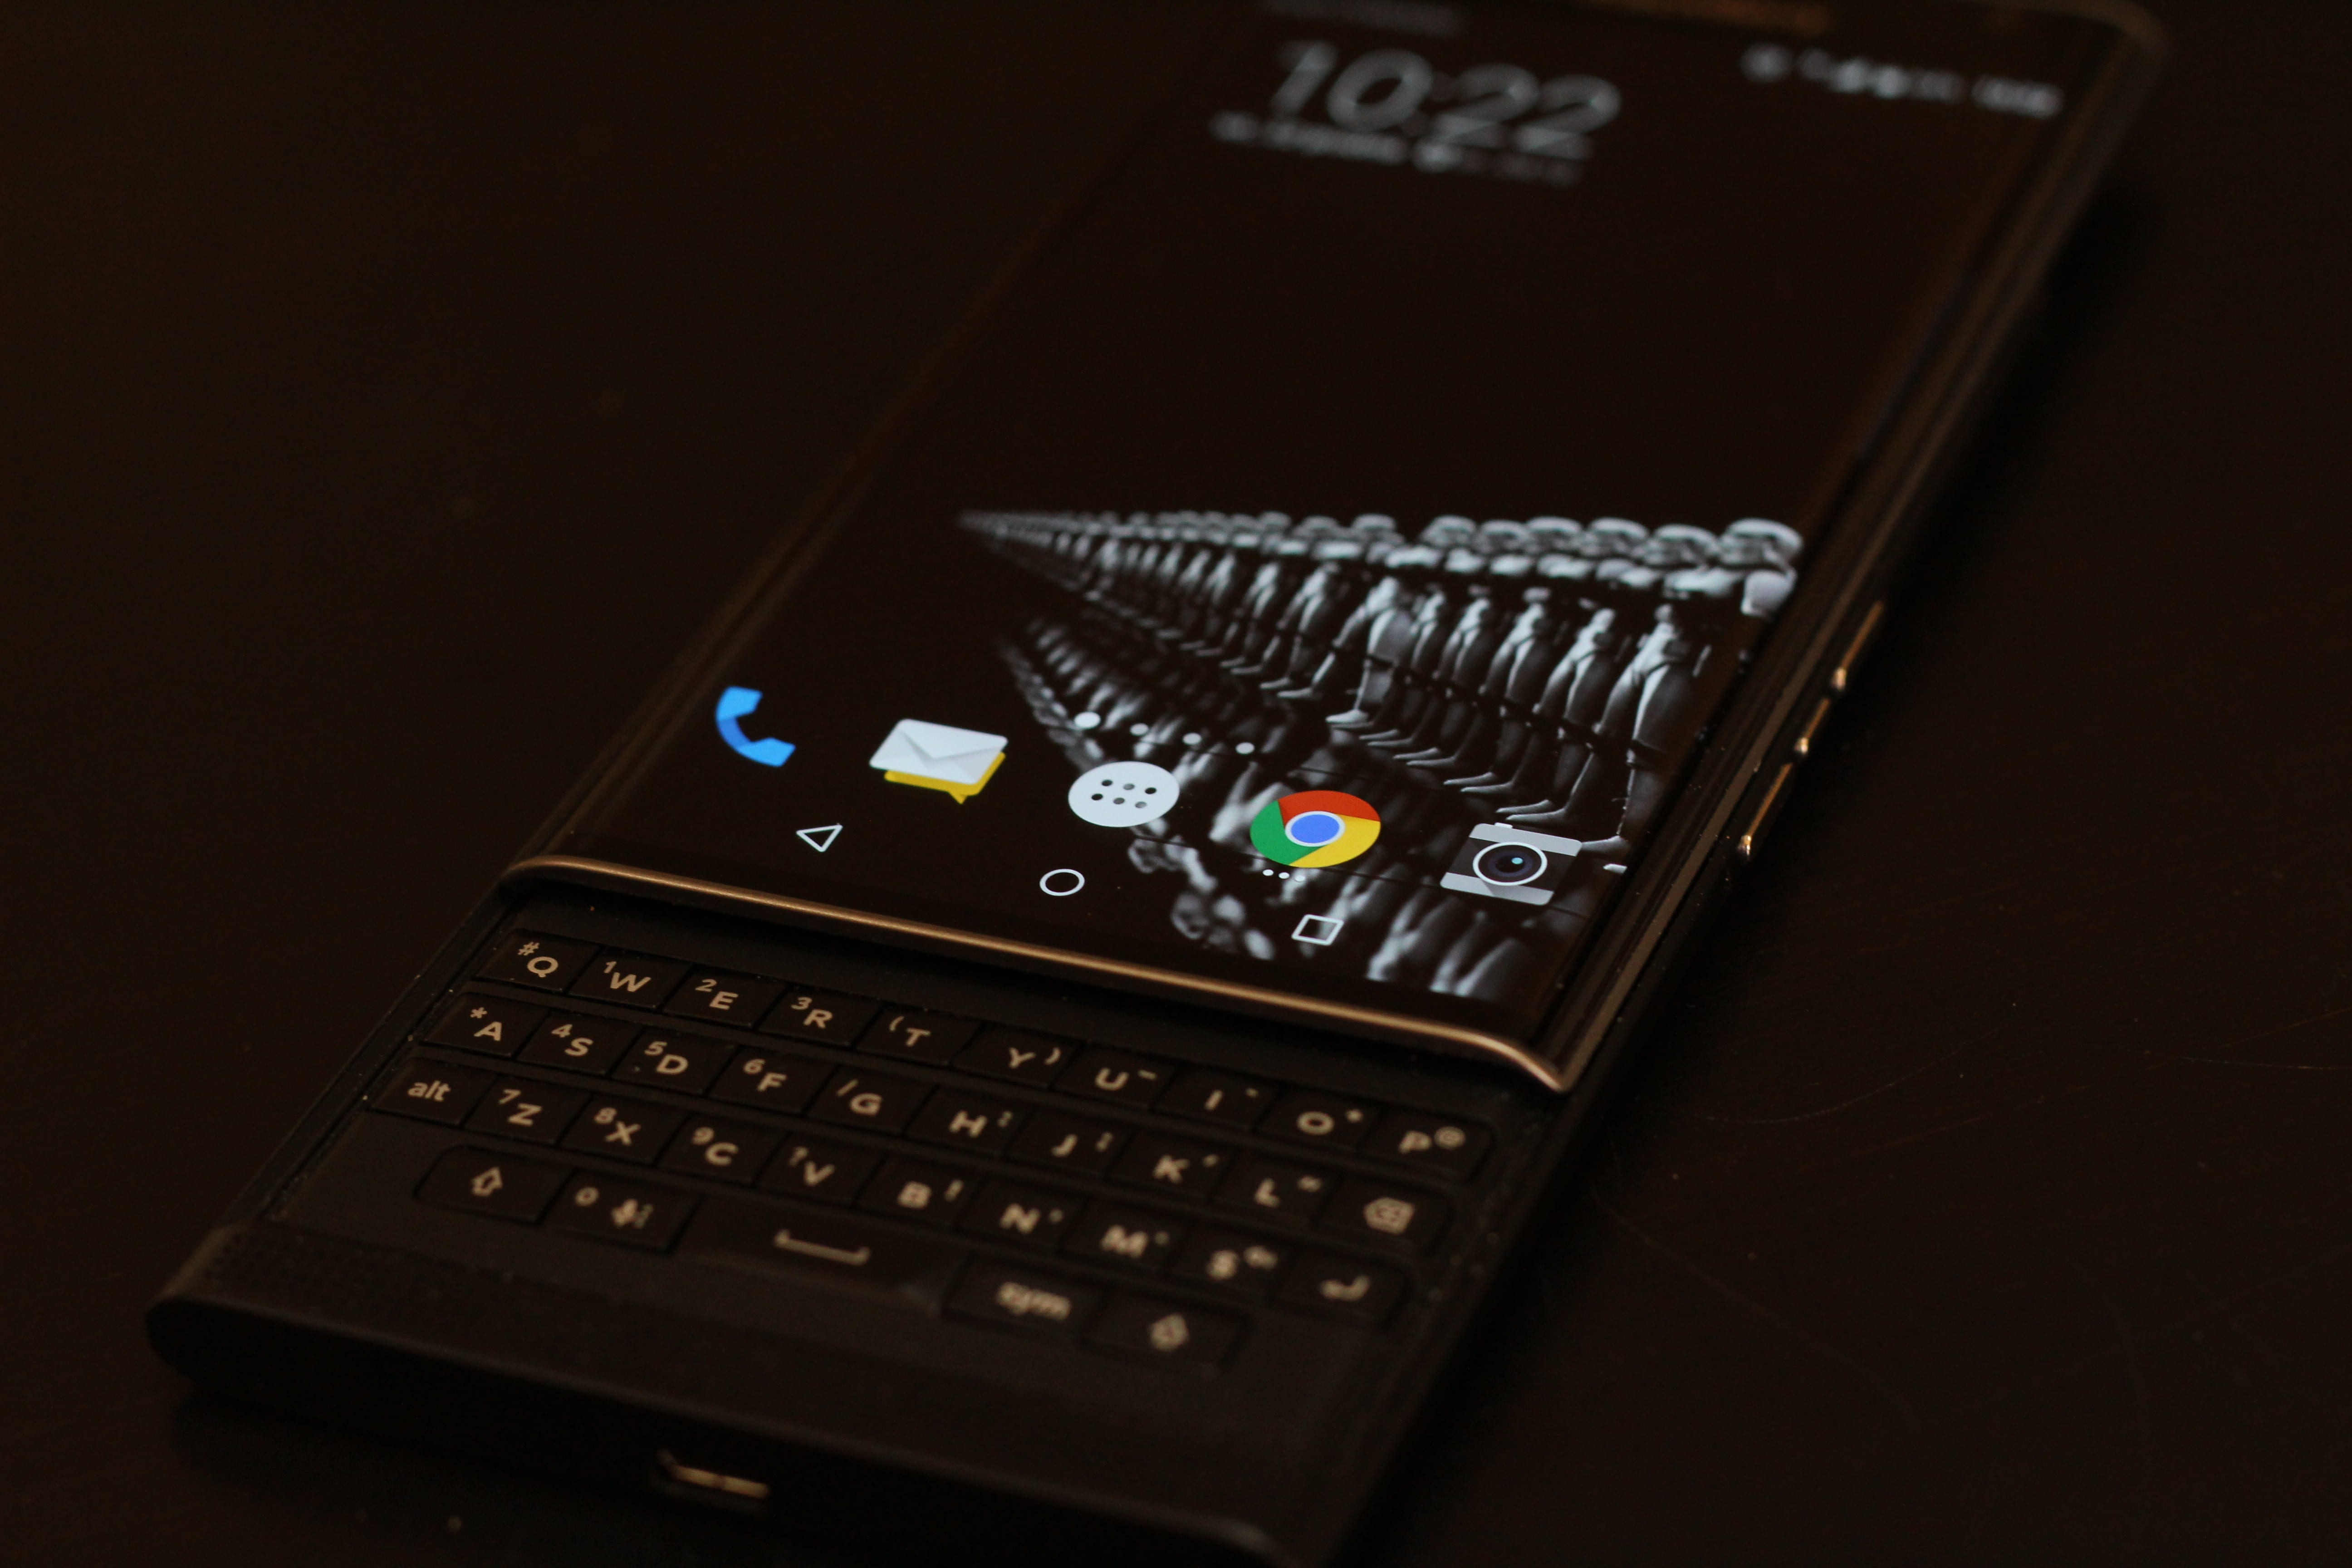 blackberry, priv, mobile phone, qwerty, curved screen, android